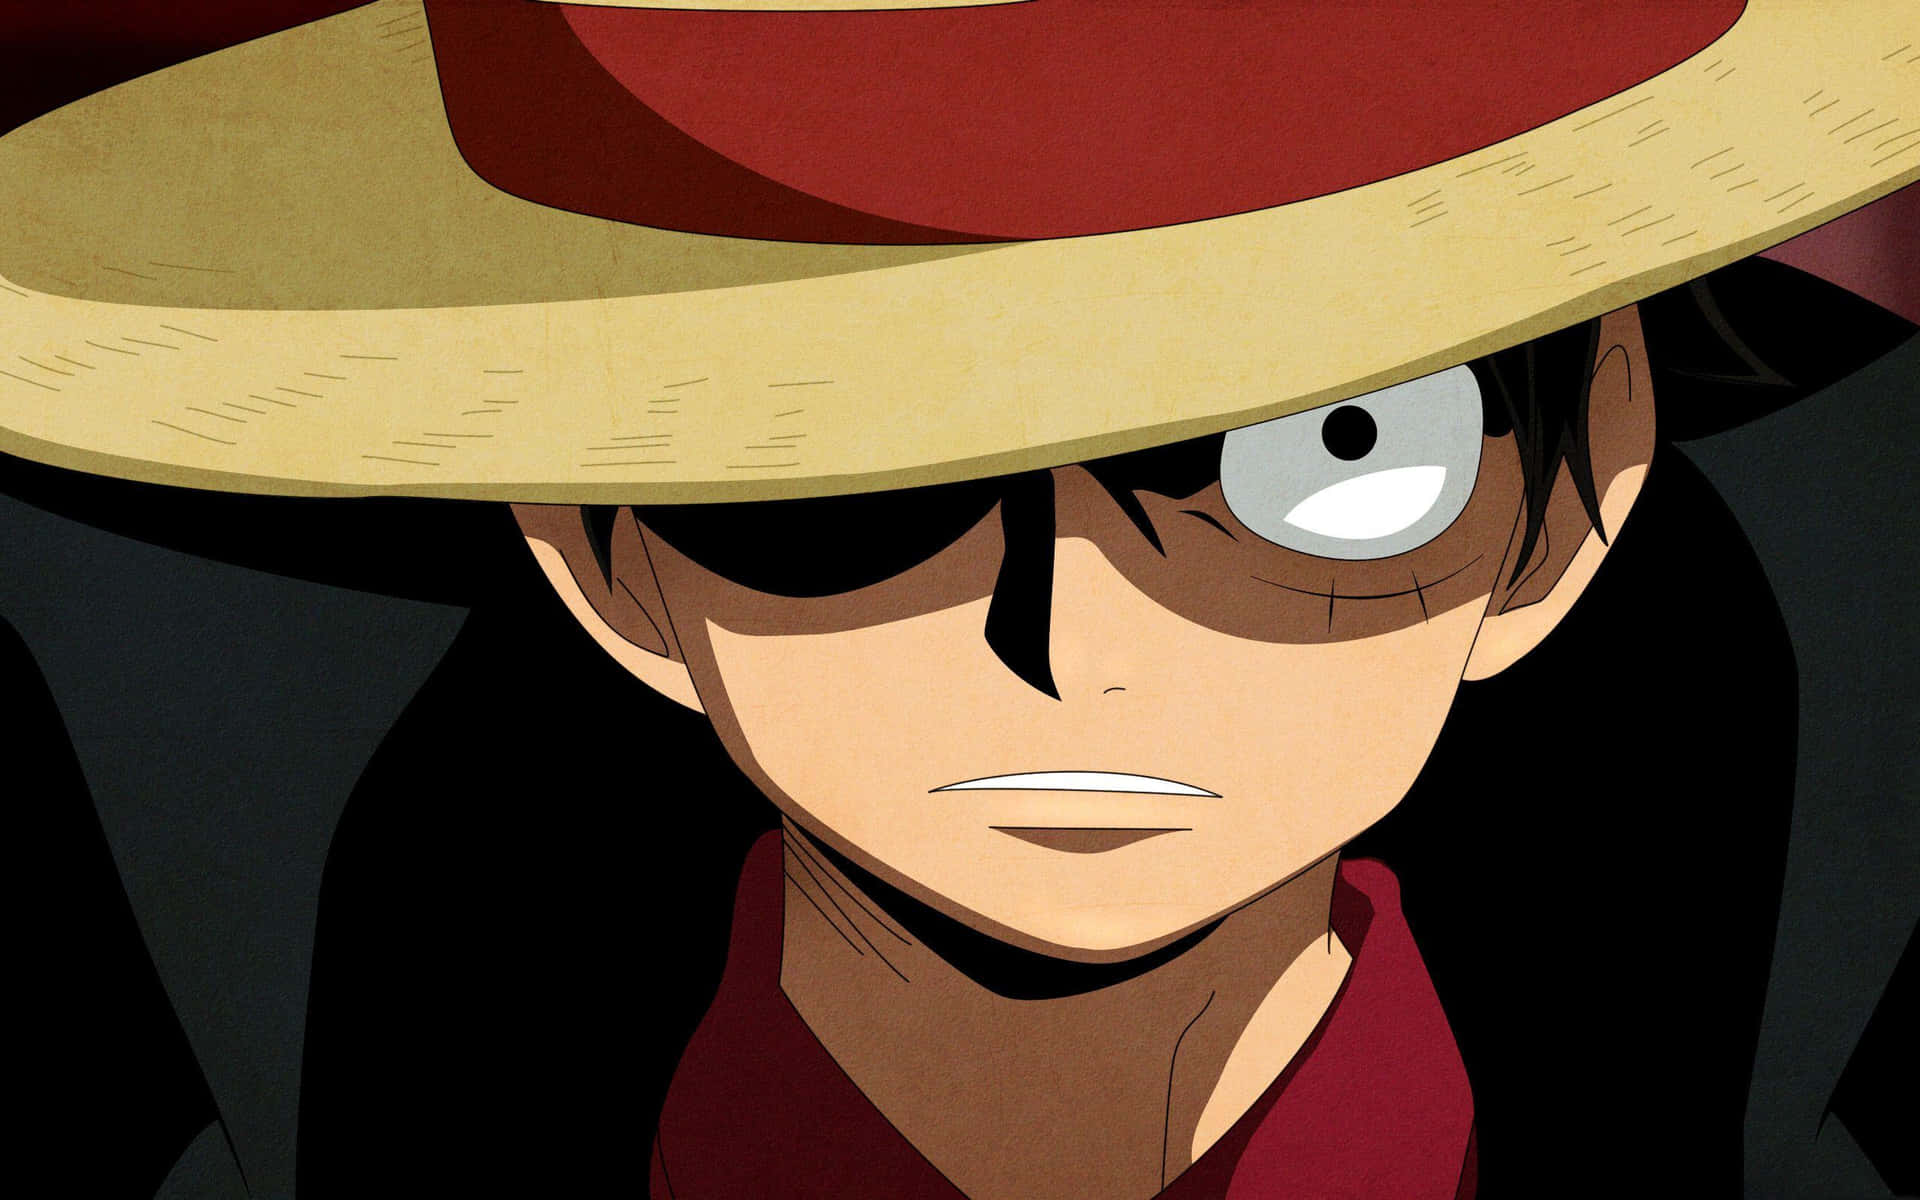 Cool Luffy Taking On The World